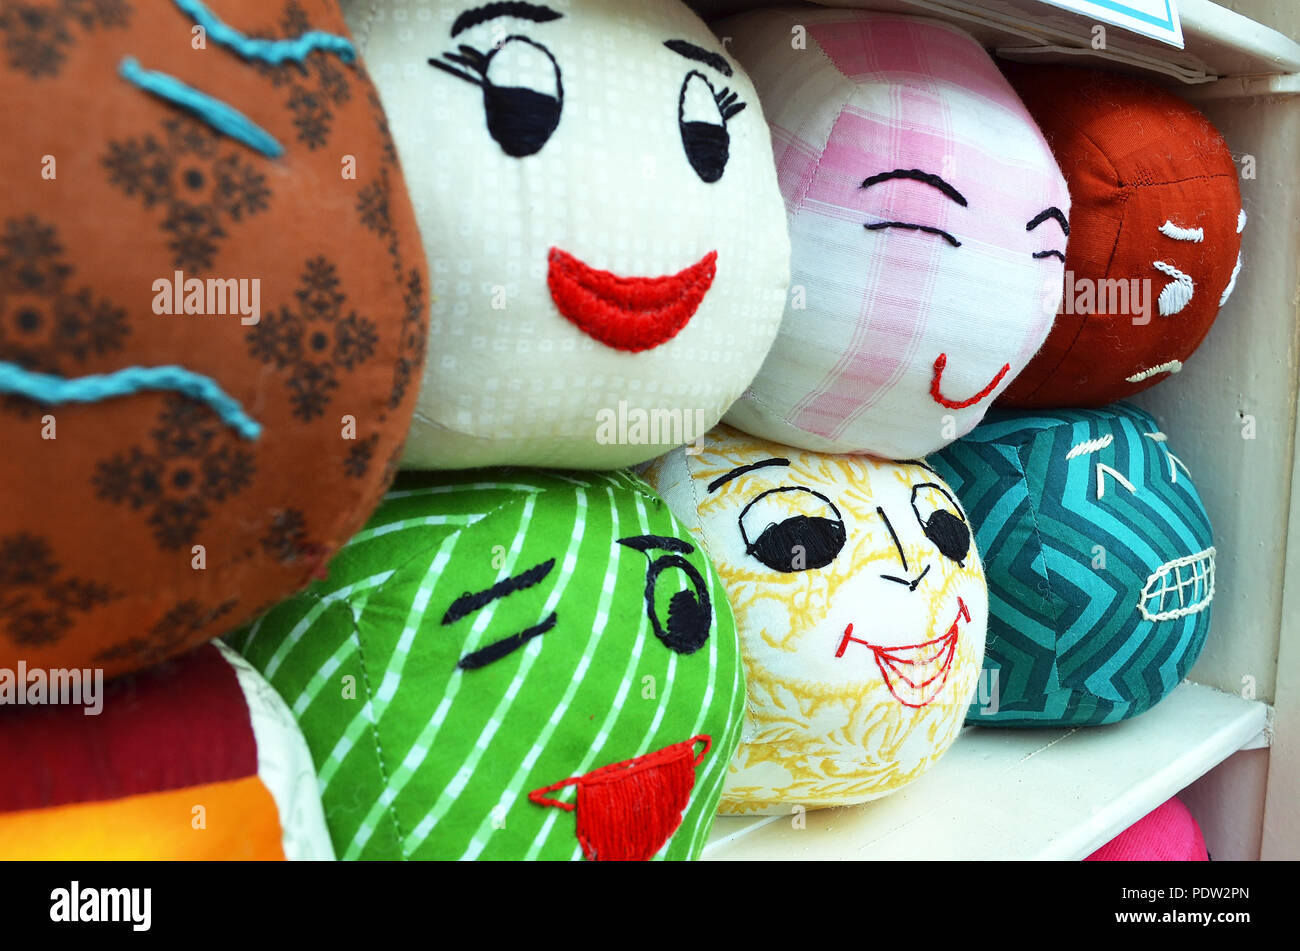 Different human expressions and emotions portrayed on pillows Stock Photo